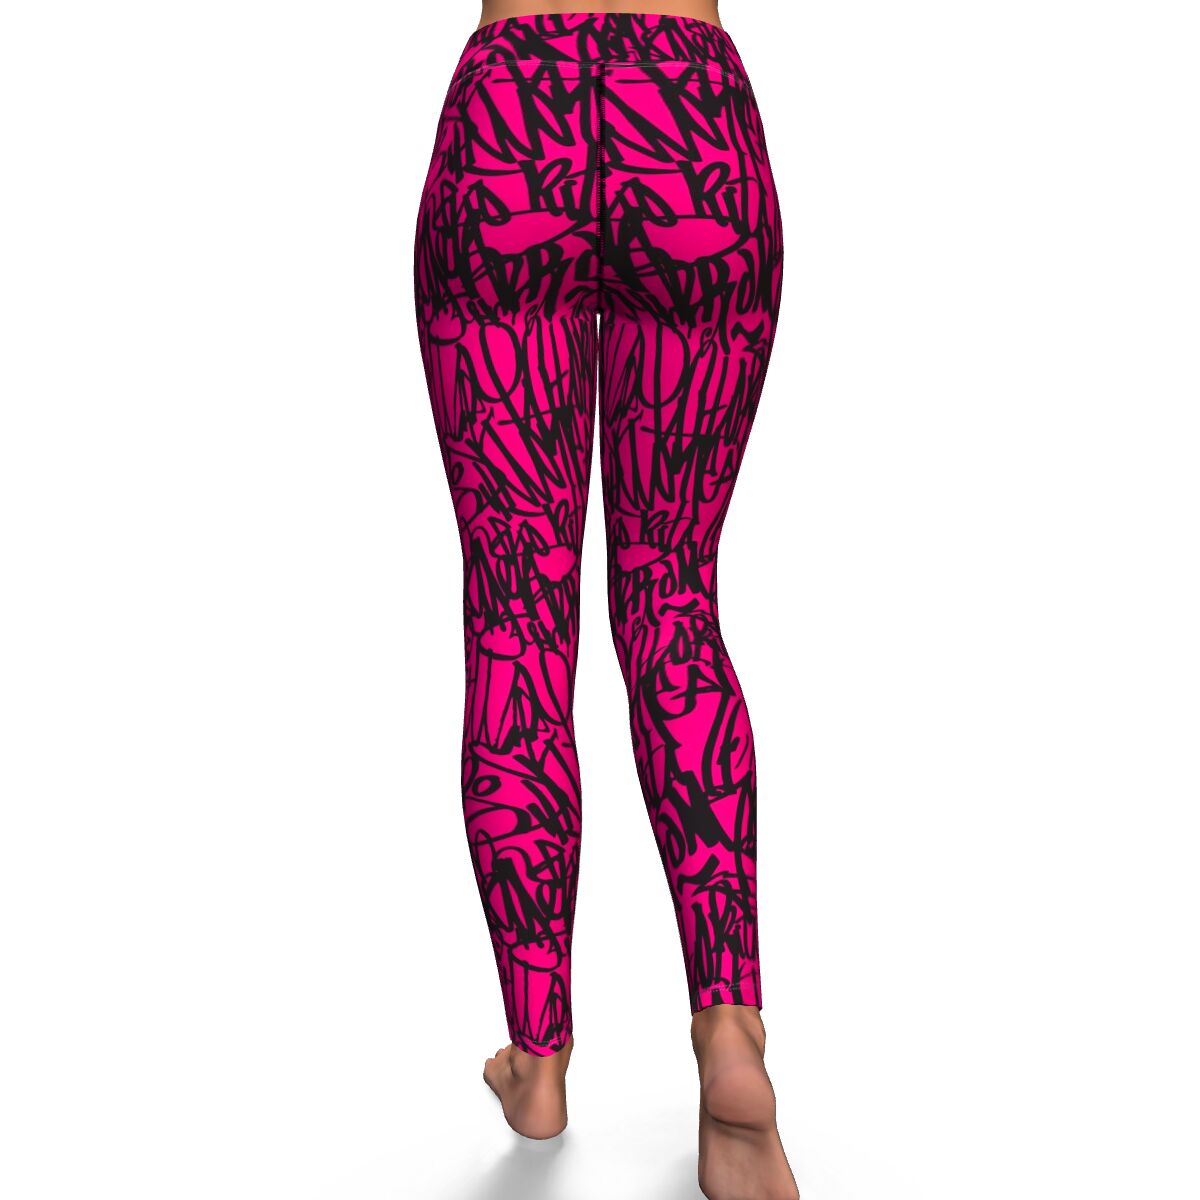 Pink Yoga Leggings with Black Half Skull line pattern – Rip Some Lip Today